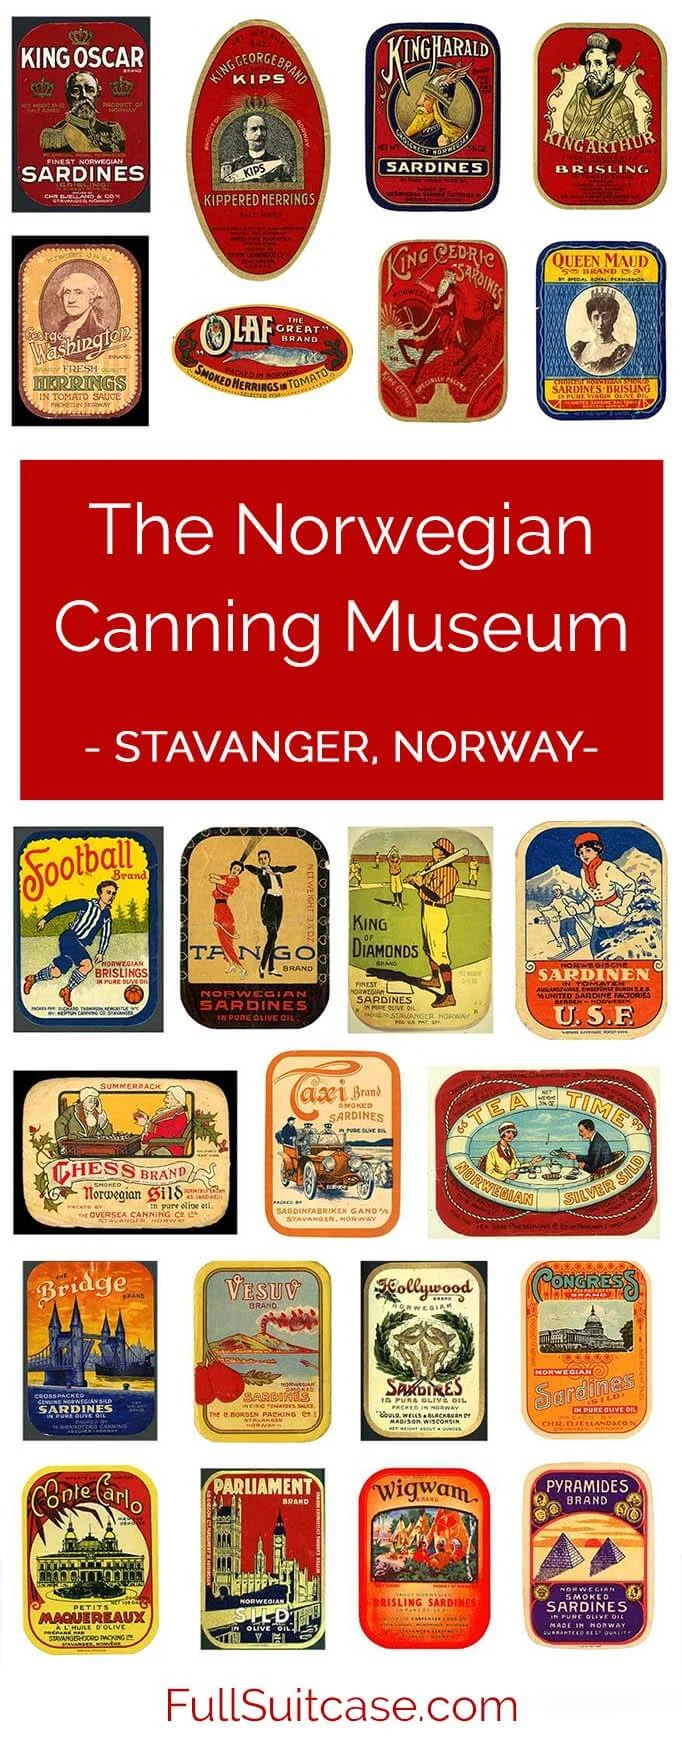 What to expect when visiting the Norwegian Canning Museum in Stavanger, Norway